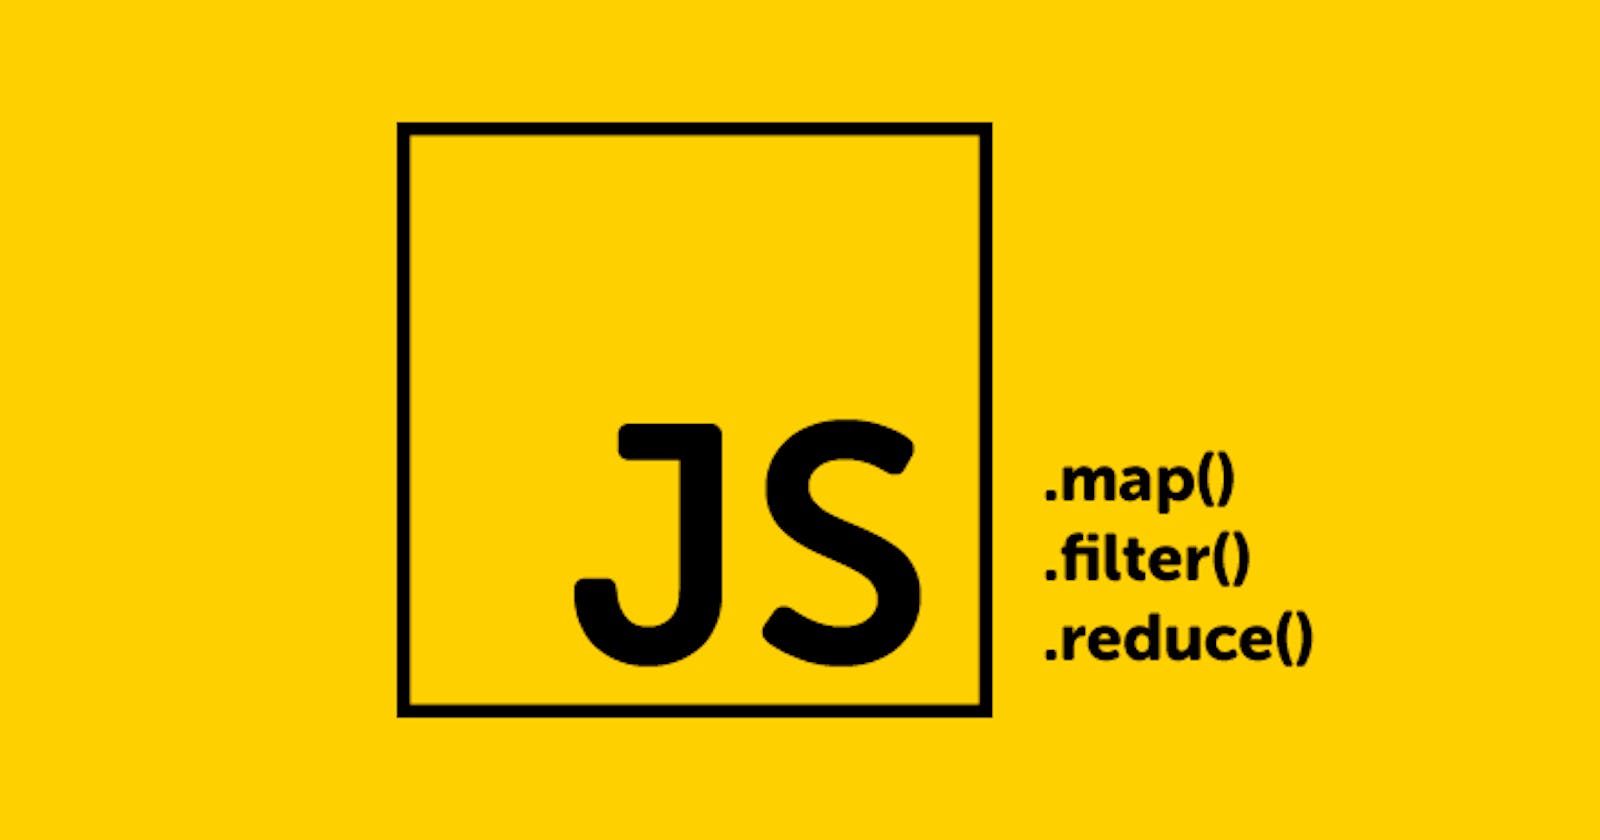 Creating your own map(), filter() and reduce() in JavaScript